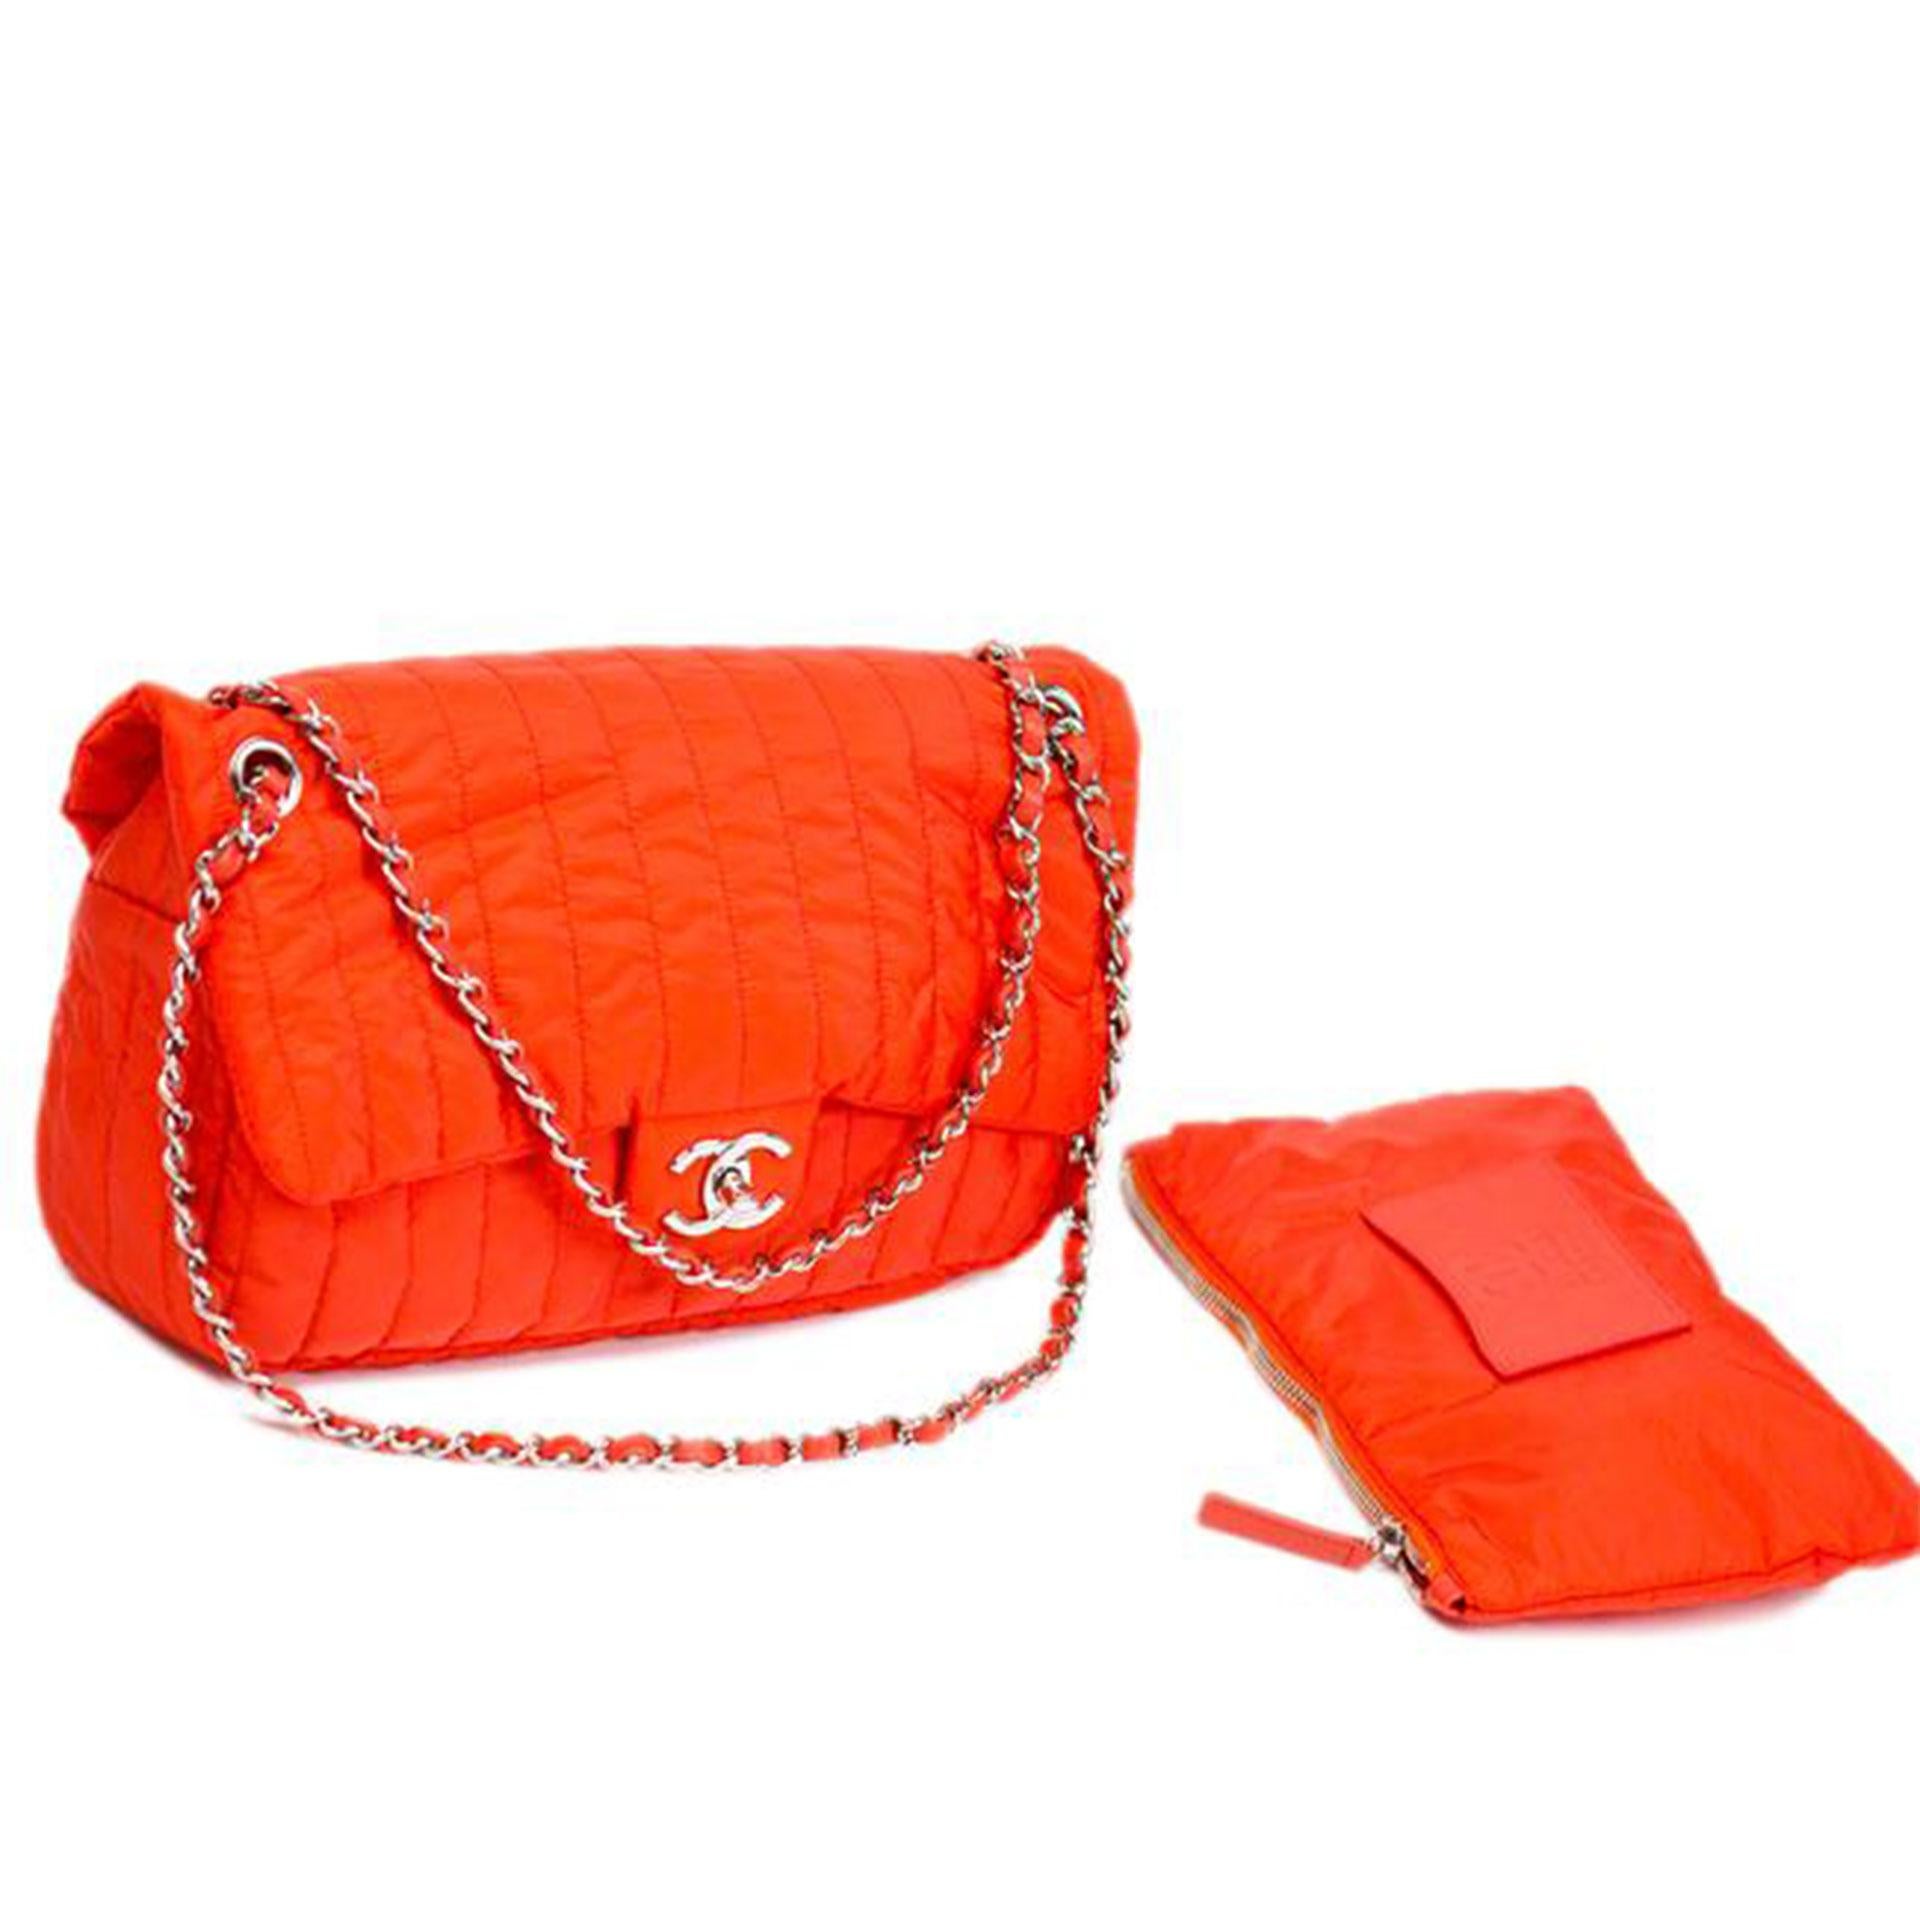 Chanel Soft Shell Flap Bag Vertical Quilted Nylon Jumbo is a limited edition piece from the brands' Spring 2012 Collection. Crafted from red orange quilted nylon, this chic bag features woven-in leather chain strap, front flap with CC turn-lock